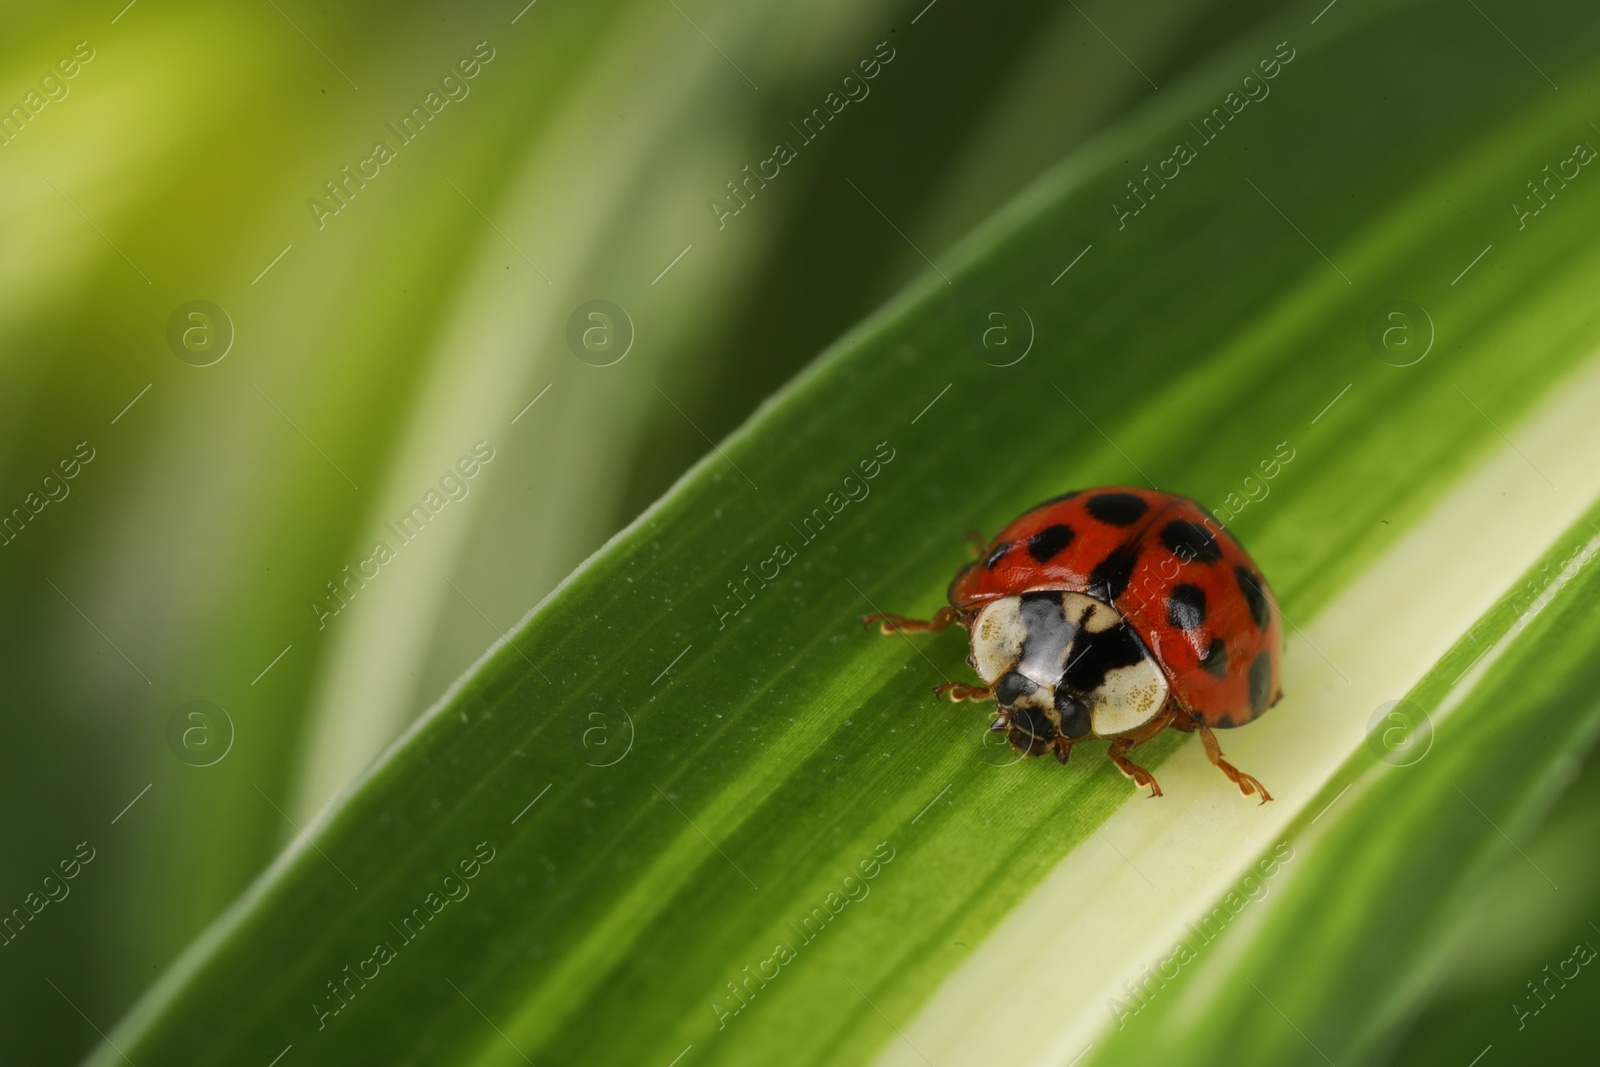 Photo of Ladybug on green leaf against blurred background, macro view. Space for text